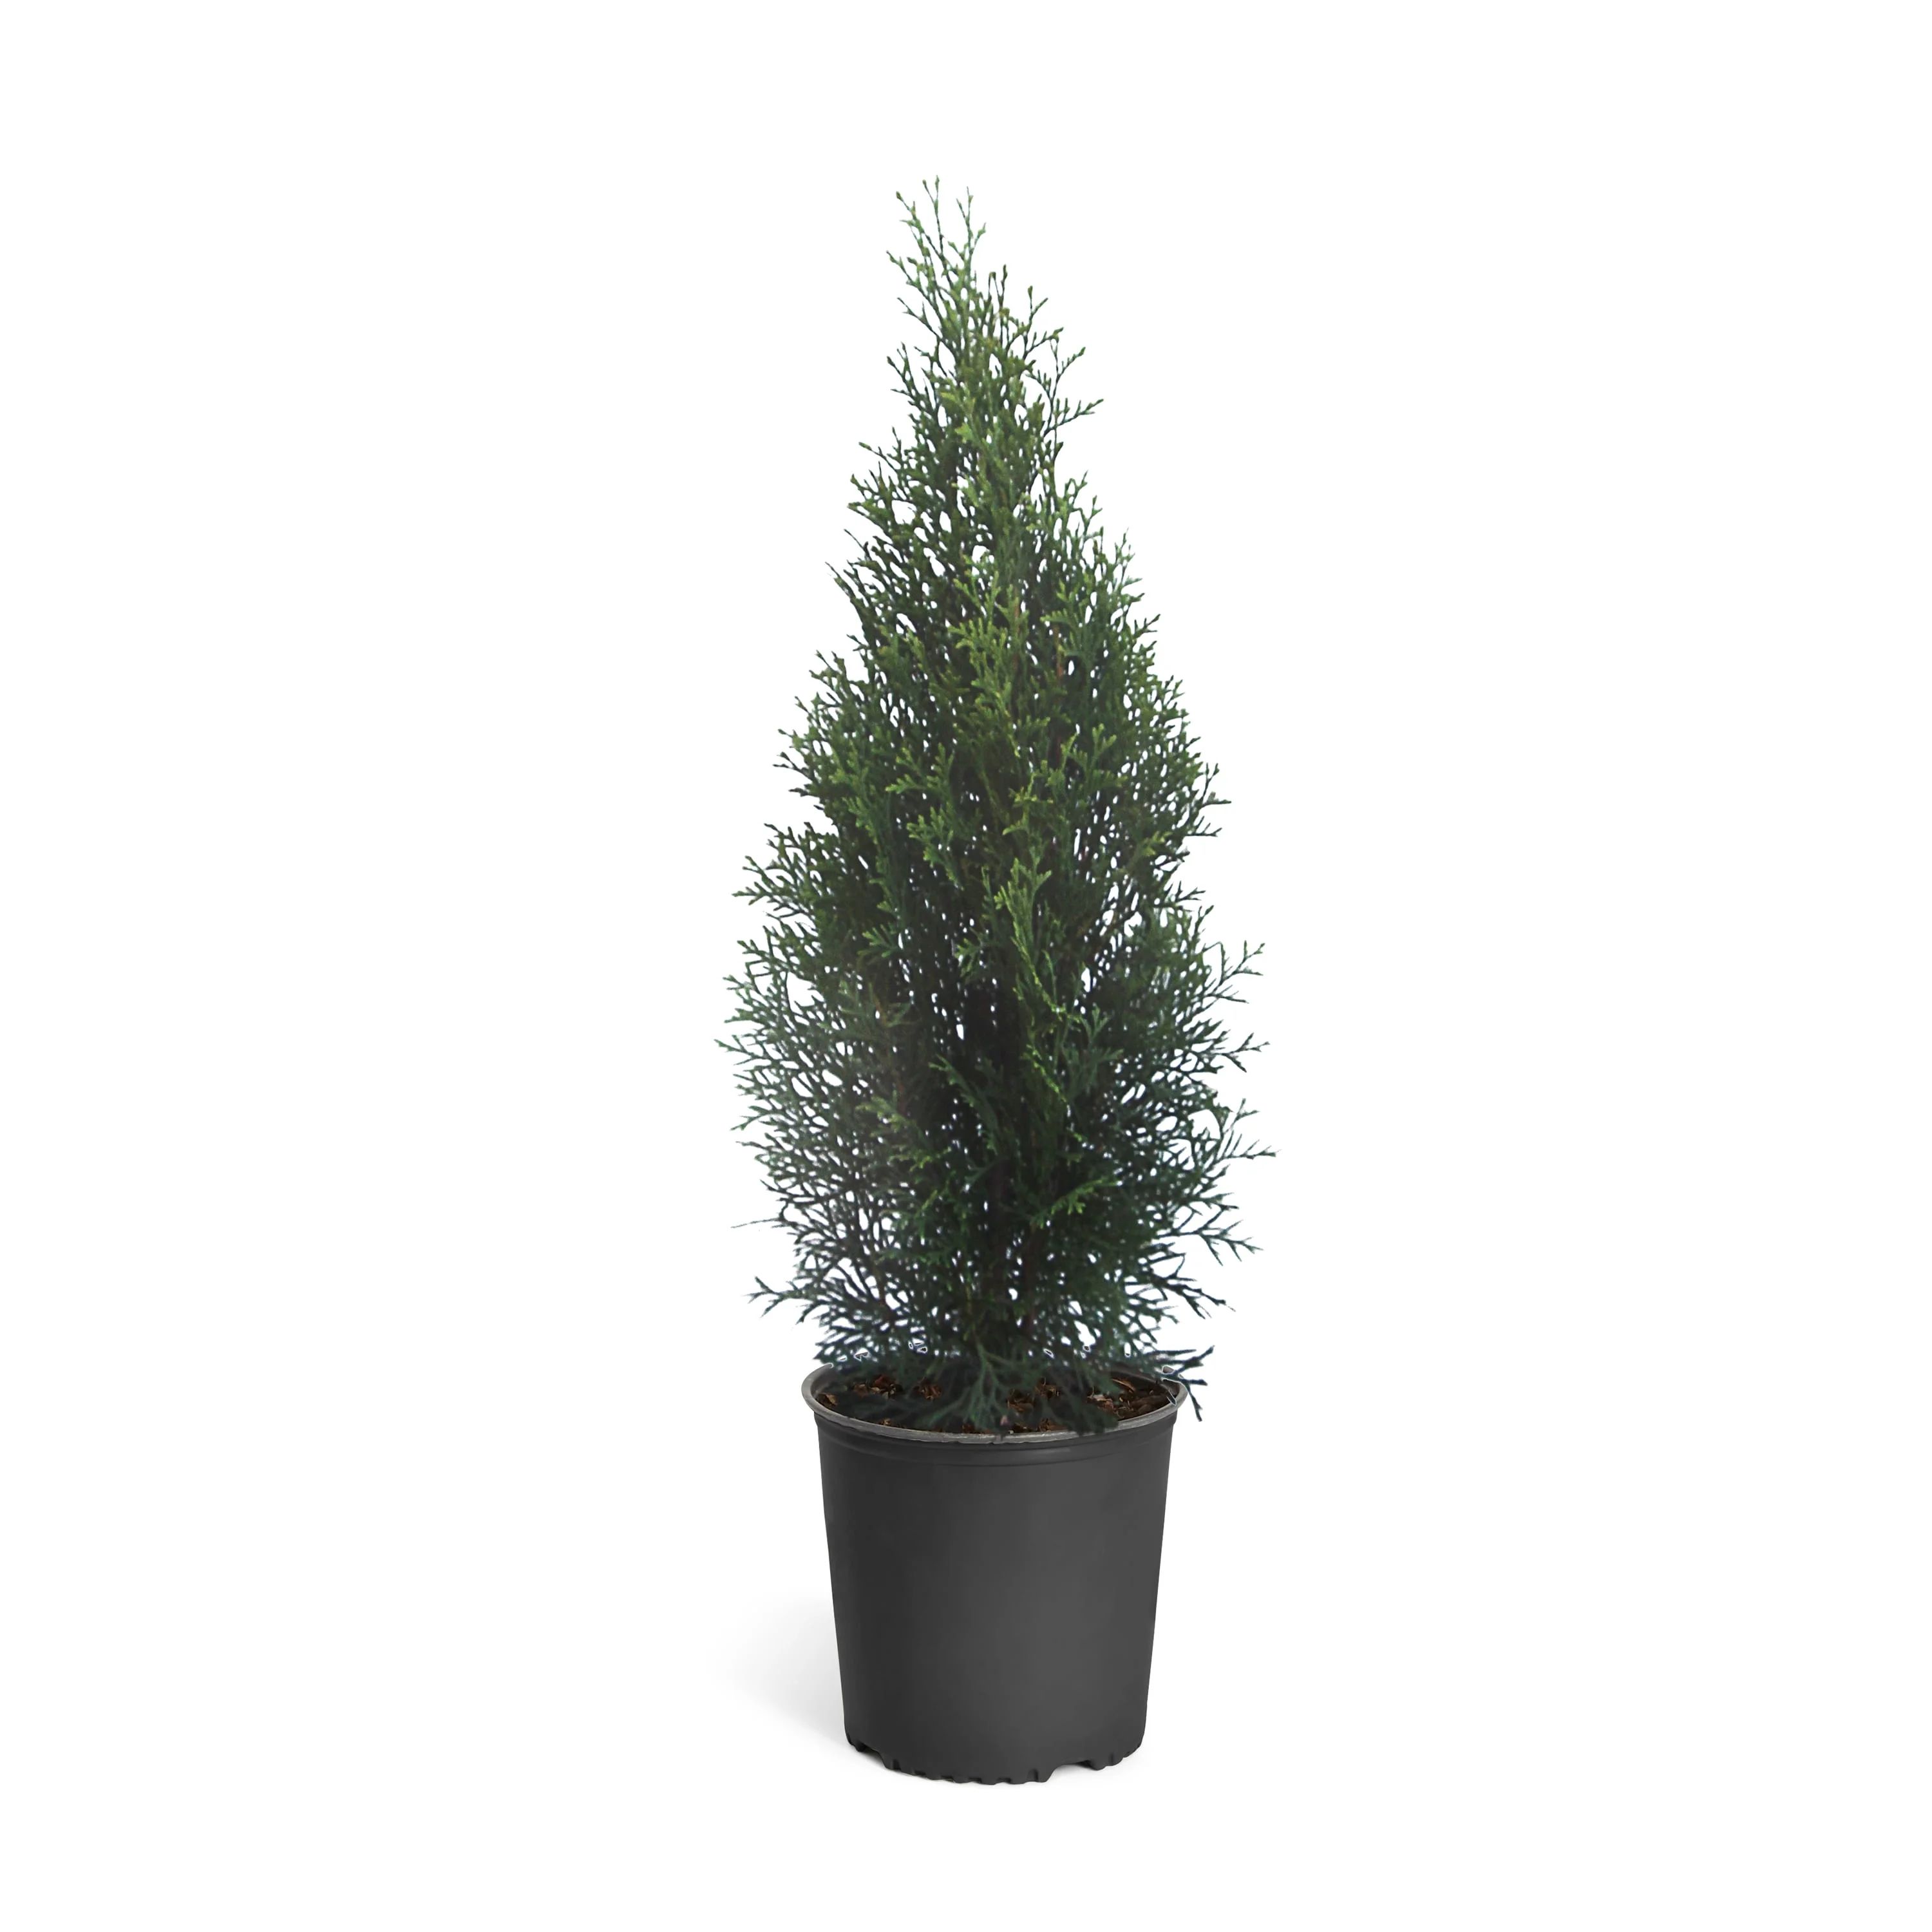 Brighter Blooms - Emerald Green Arborvitae, 1-2 ft. - No Shipping To AZ and OR | Walmart (US)